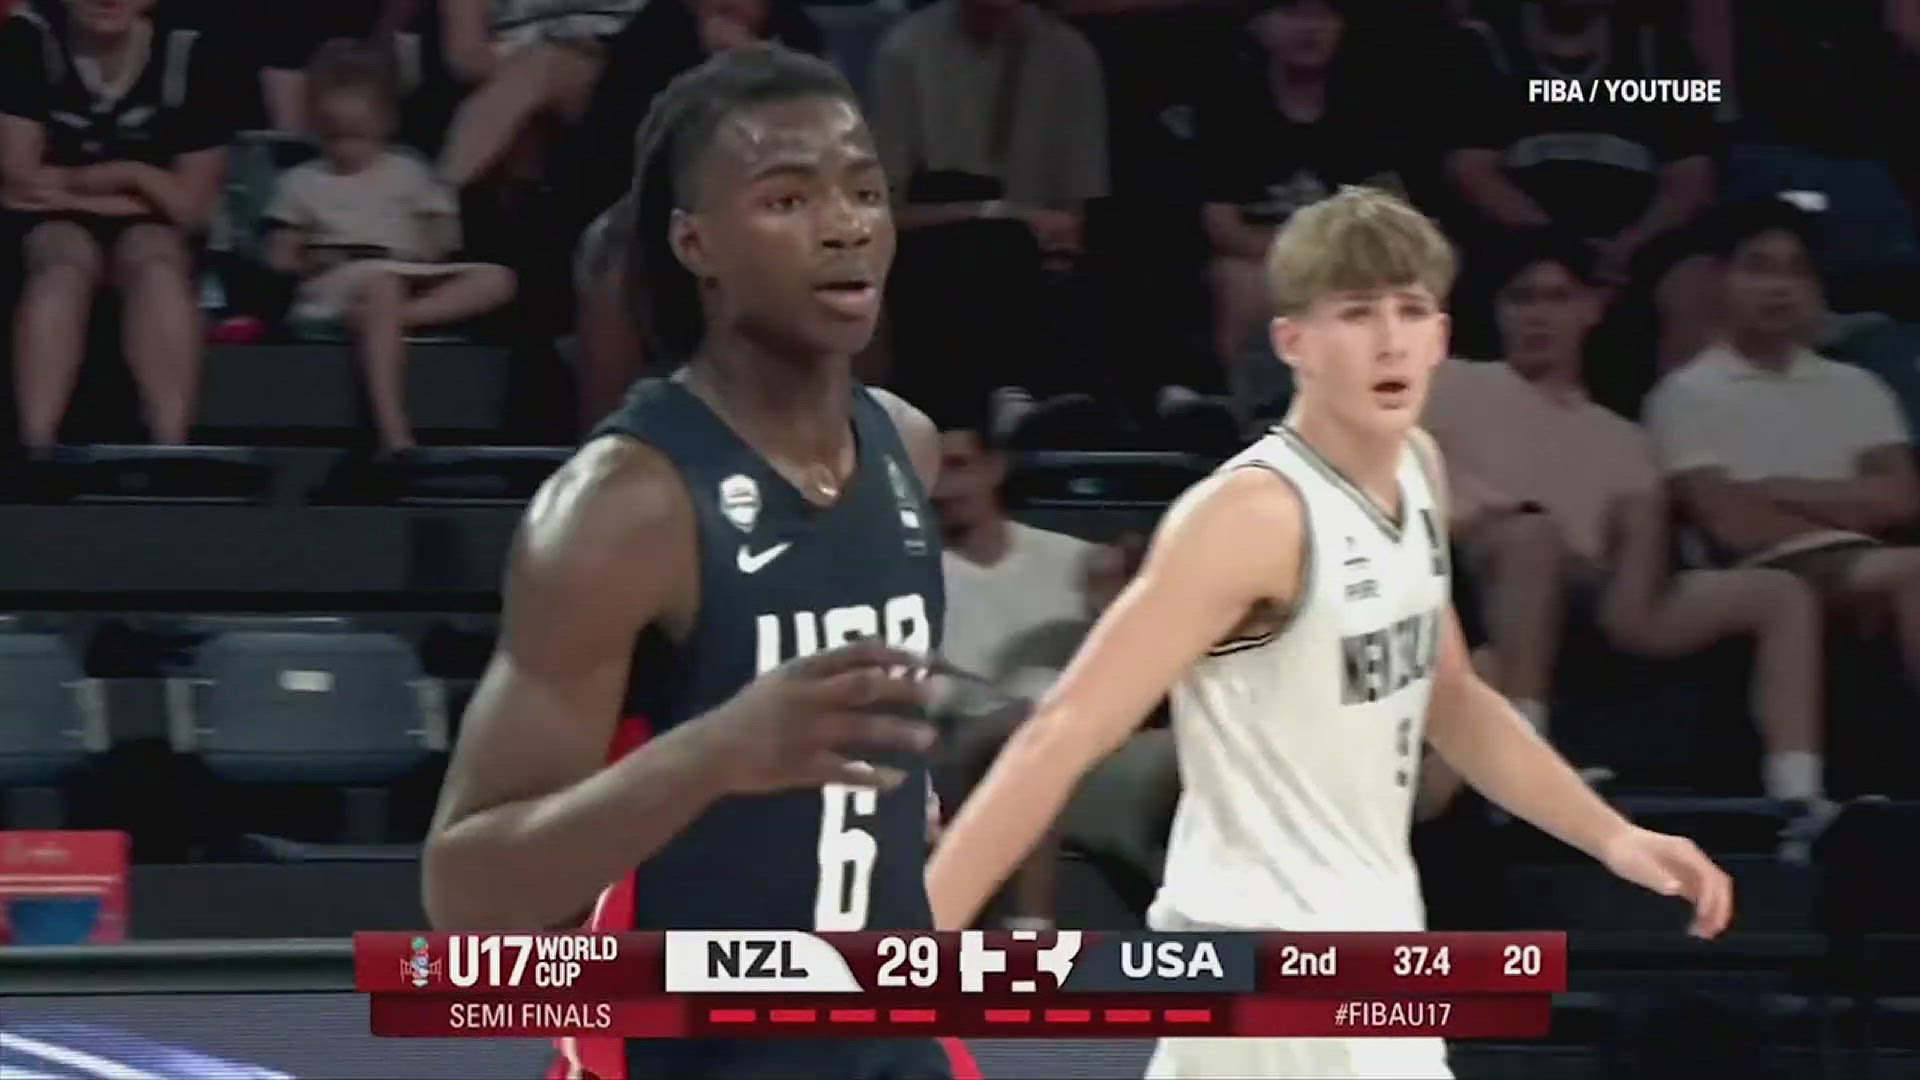 The Buckhorn Basketball star has scored 10+ points in five straight contests for Team USA.